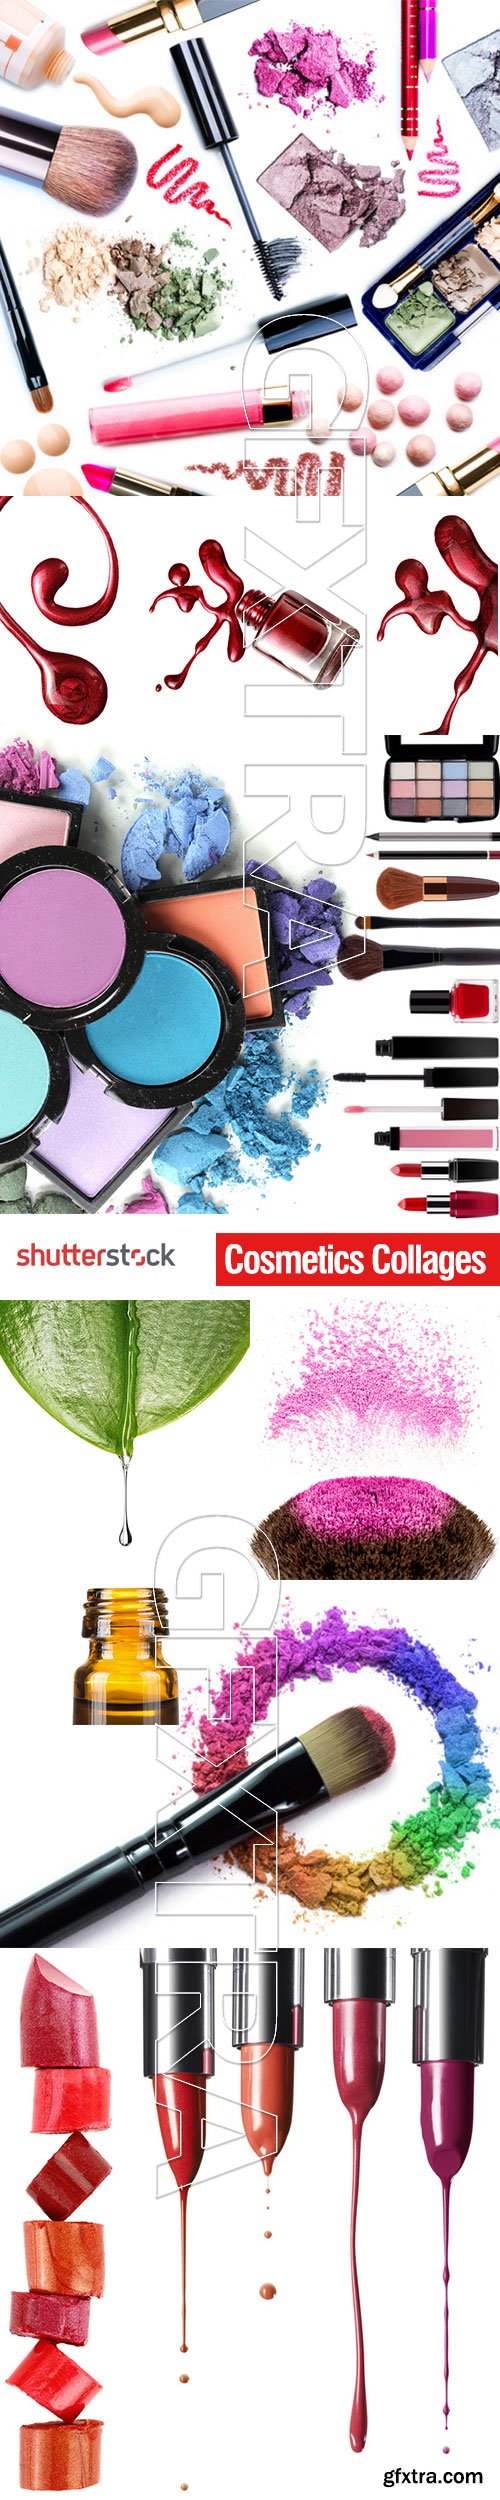 Cosmetics Collages 25xJPG